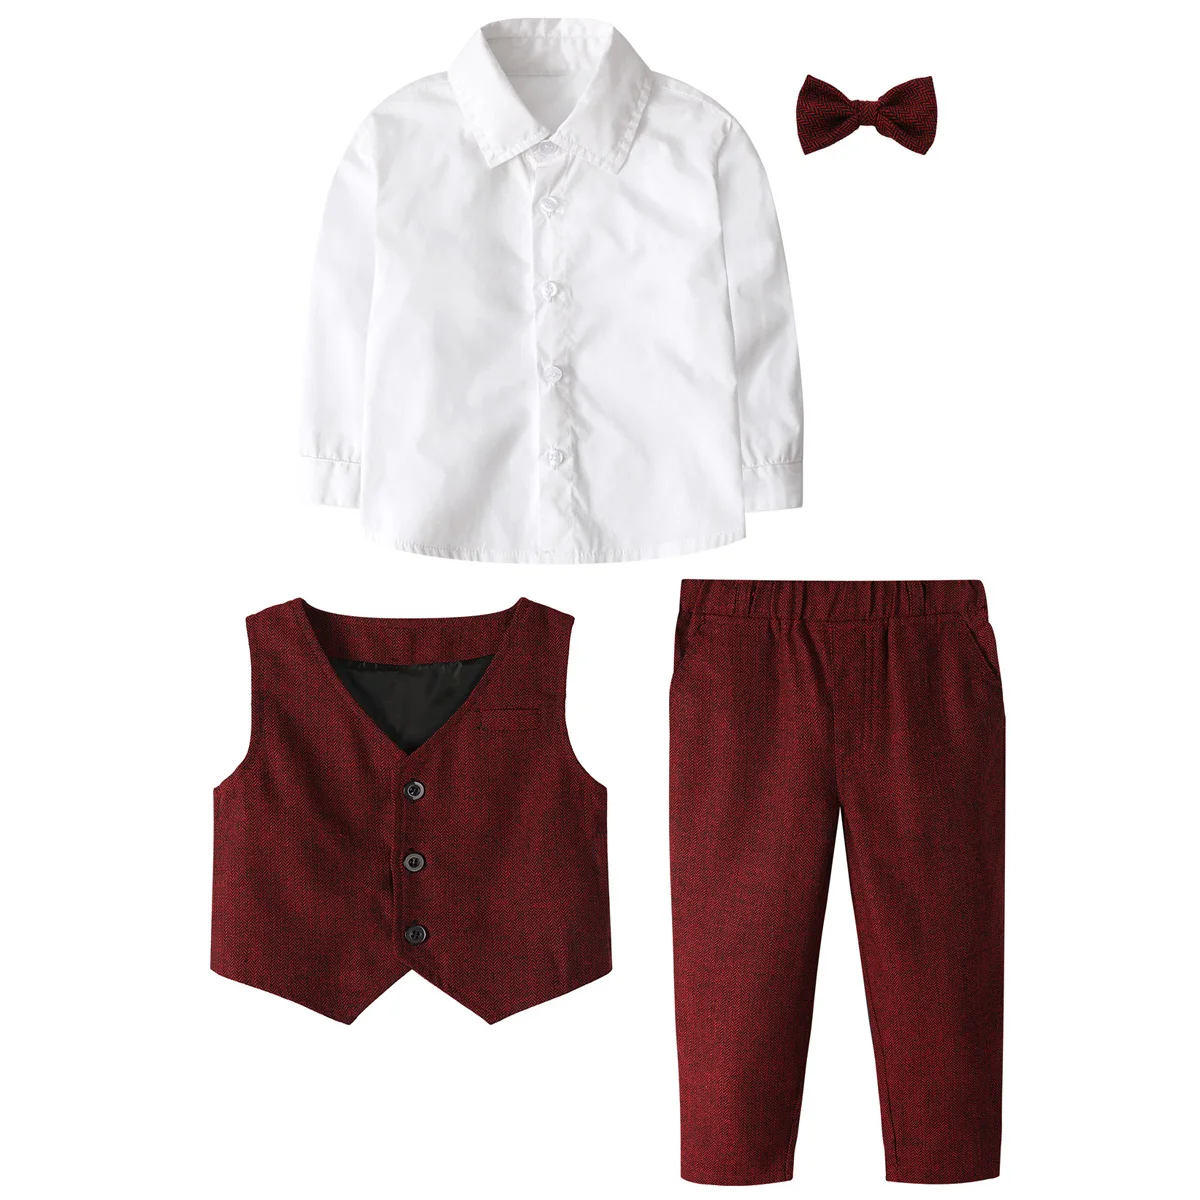 Boy Formal Clothing Set Toddler Baby Wedding Suit Sets Christening Outfit Long Sleeve Shirt Pants Bow Tie with Beret Hat 4 PCS